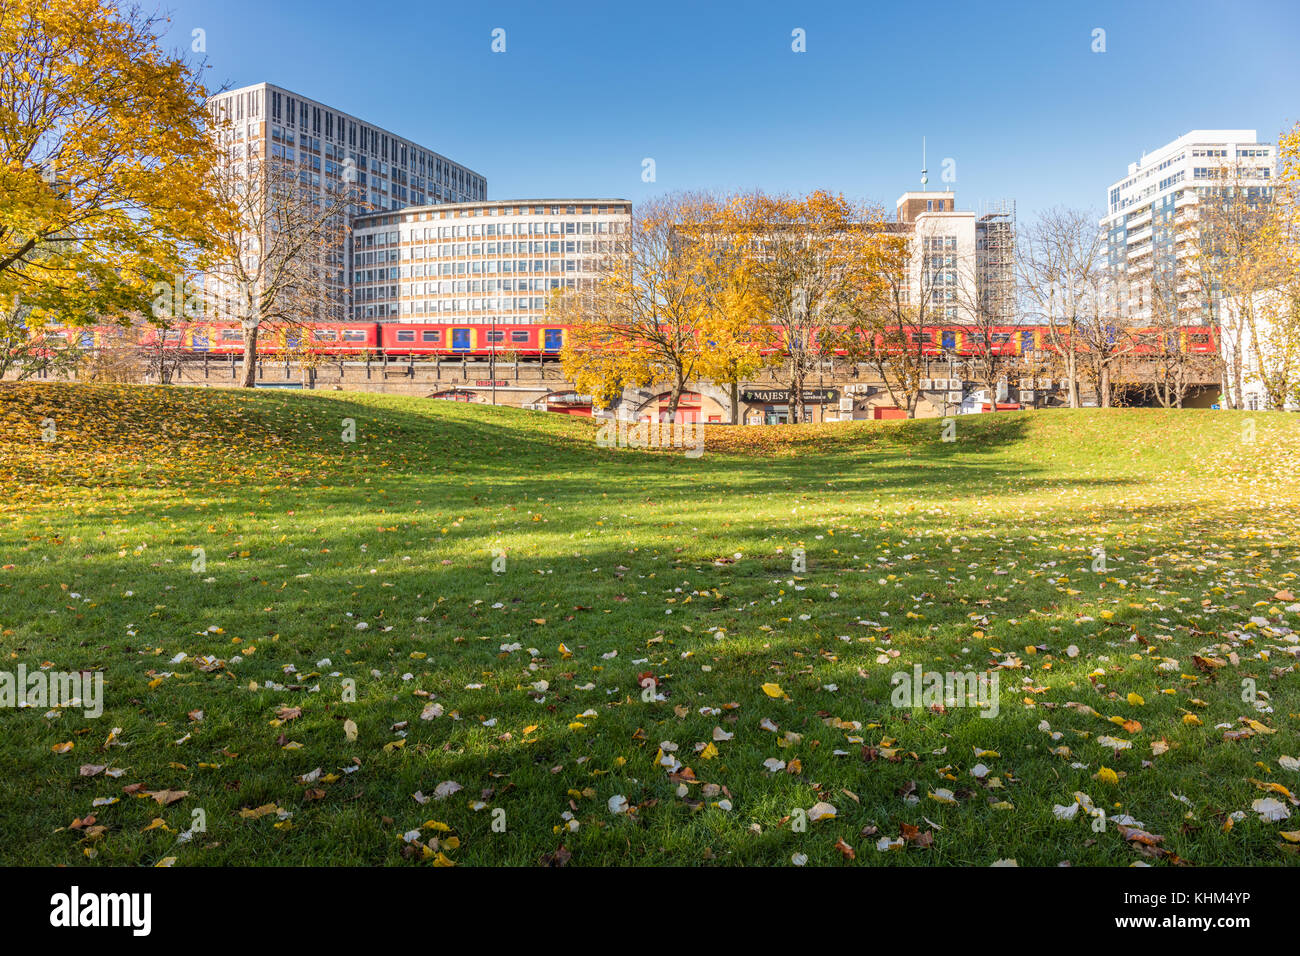 Vauxhall, London, UK; 17th November 2017; Autumn Scene in Vauxhall Pleasure Gardens.  Trees with yellow leaves, a train and office buildings. Stock Photo